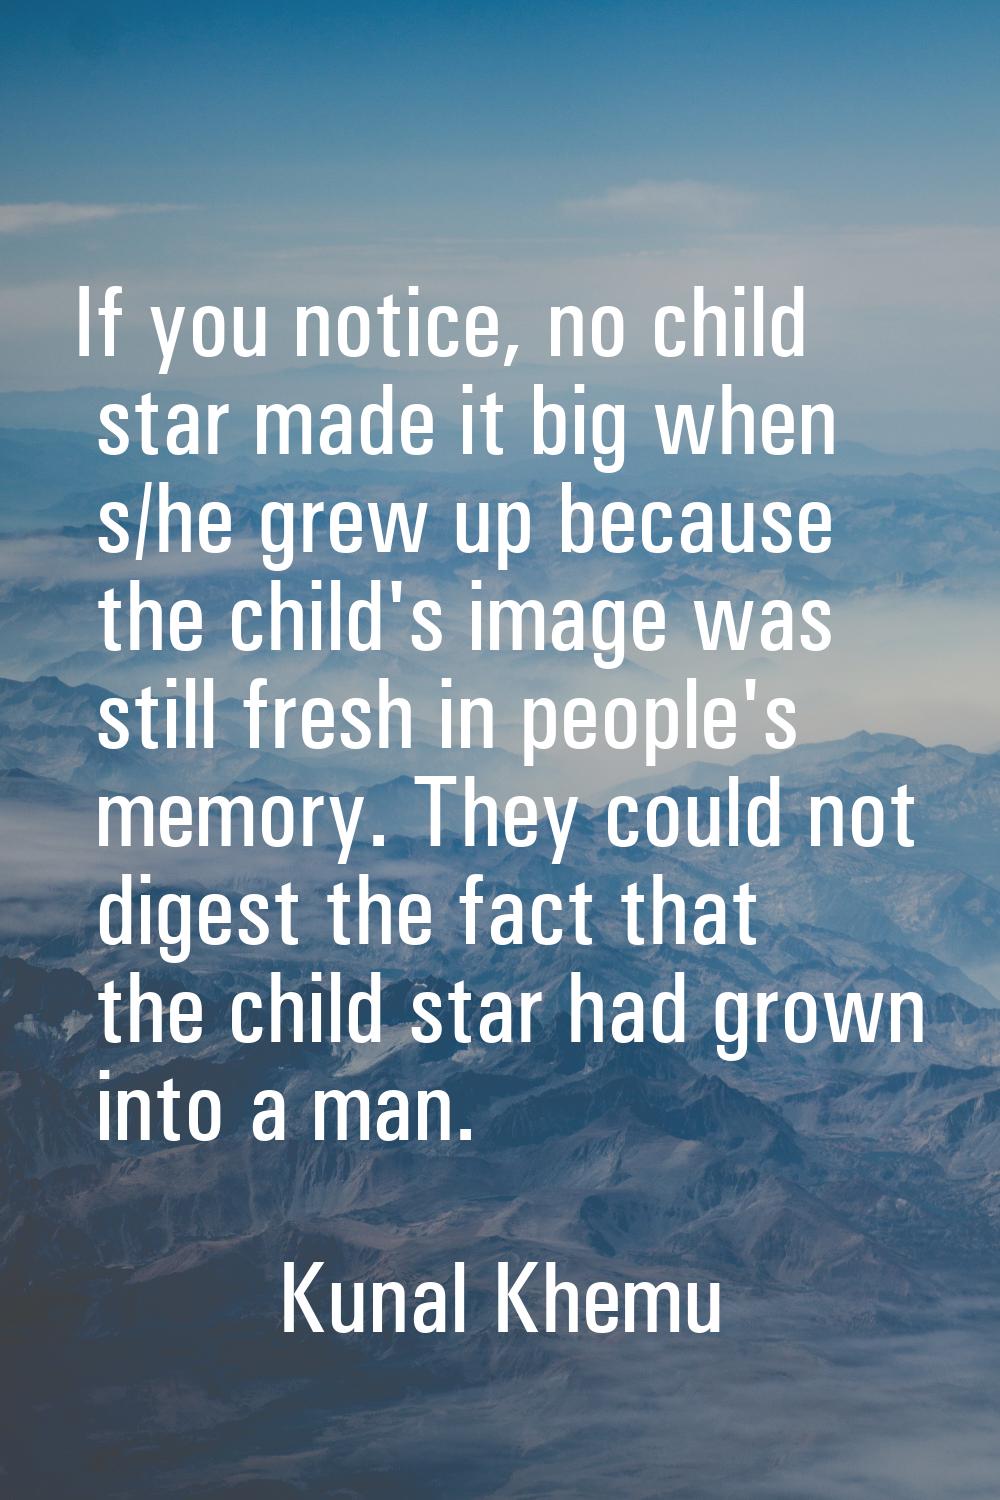 If you notice, no child star made it big when s/he grew up because the child's image was still fres